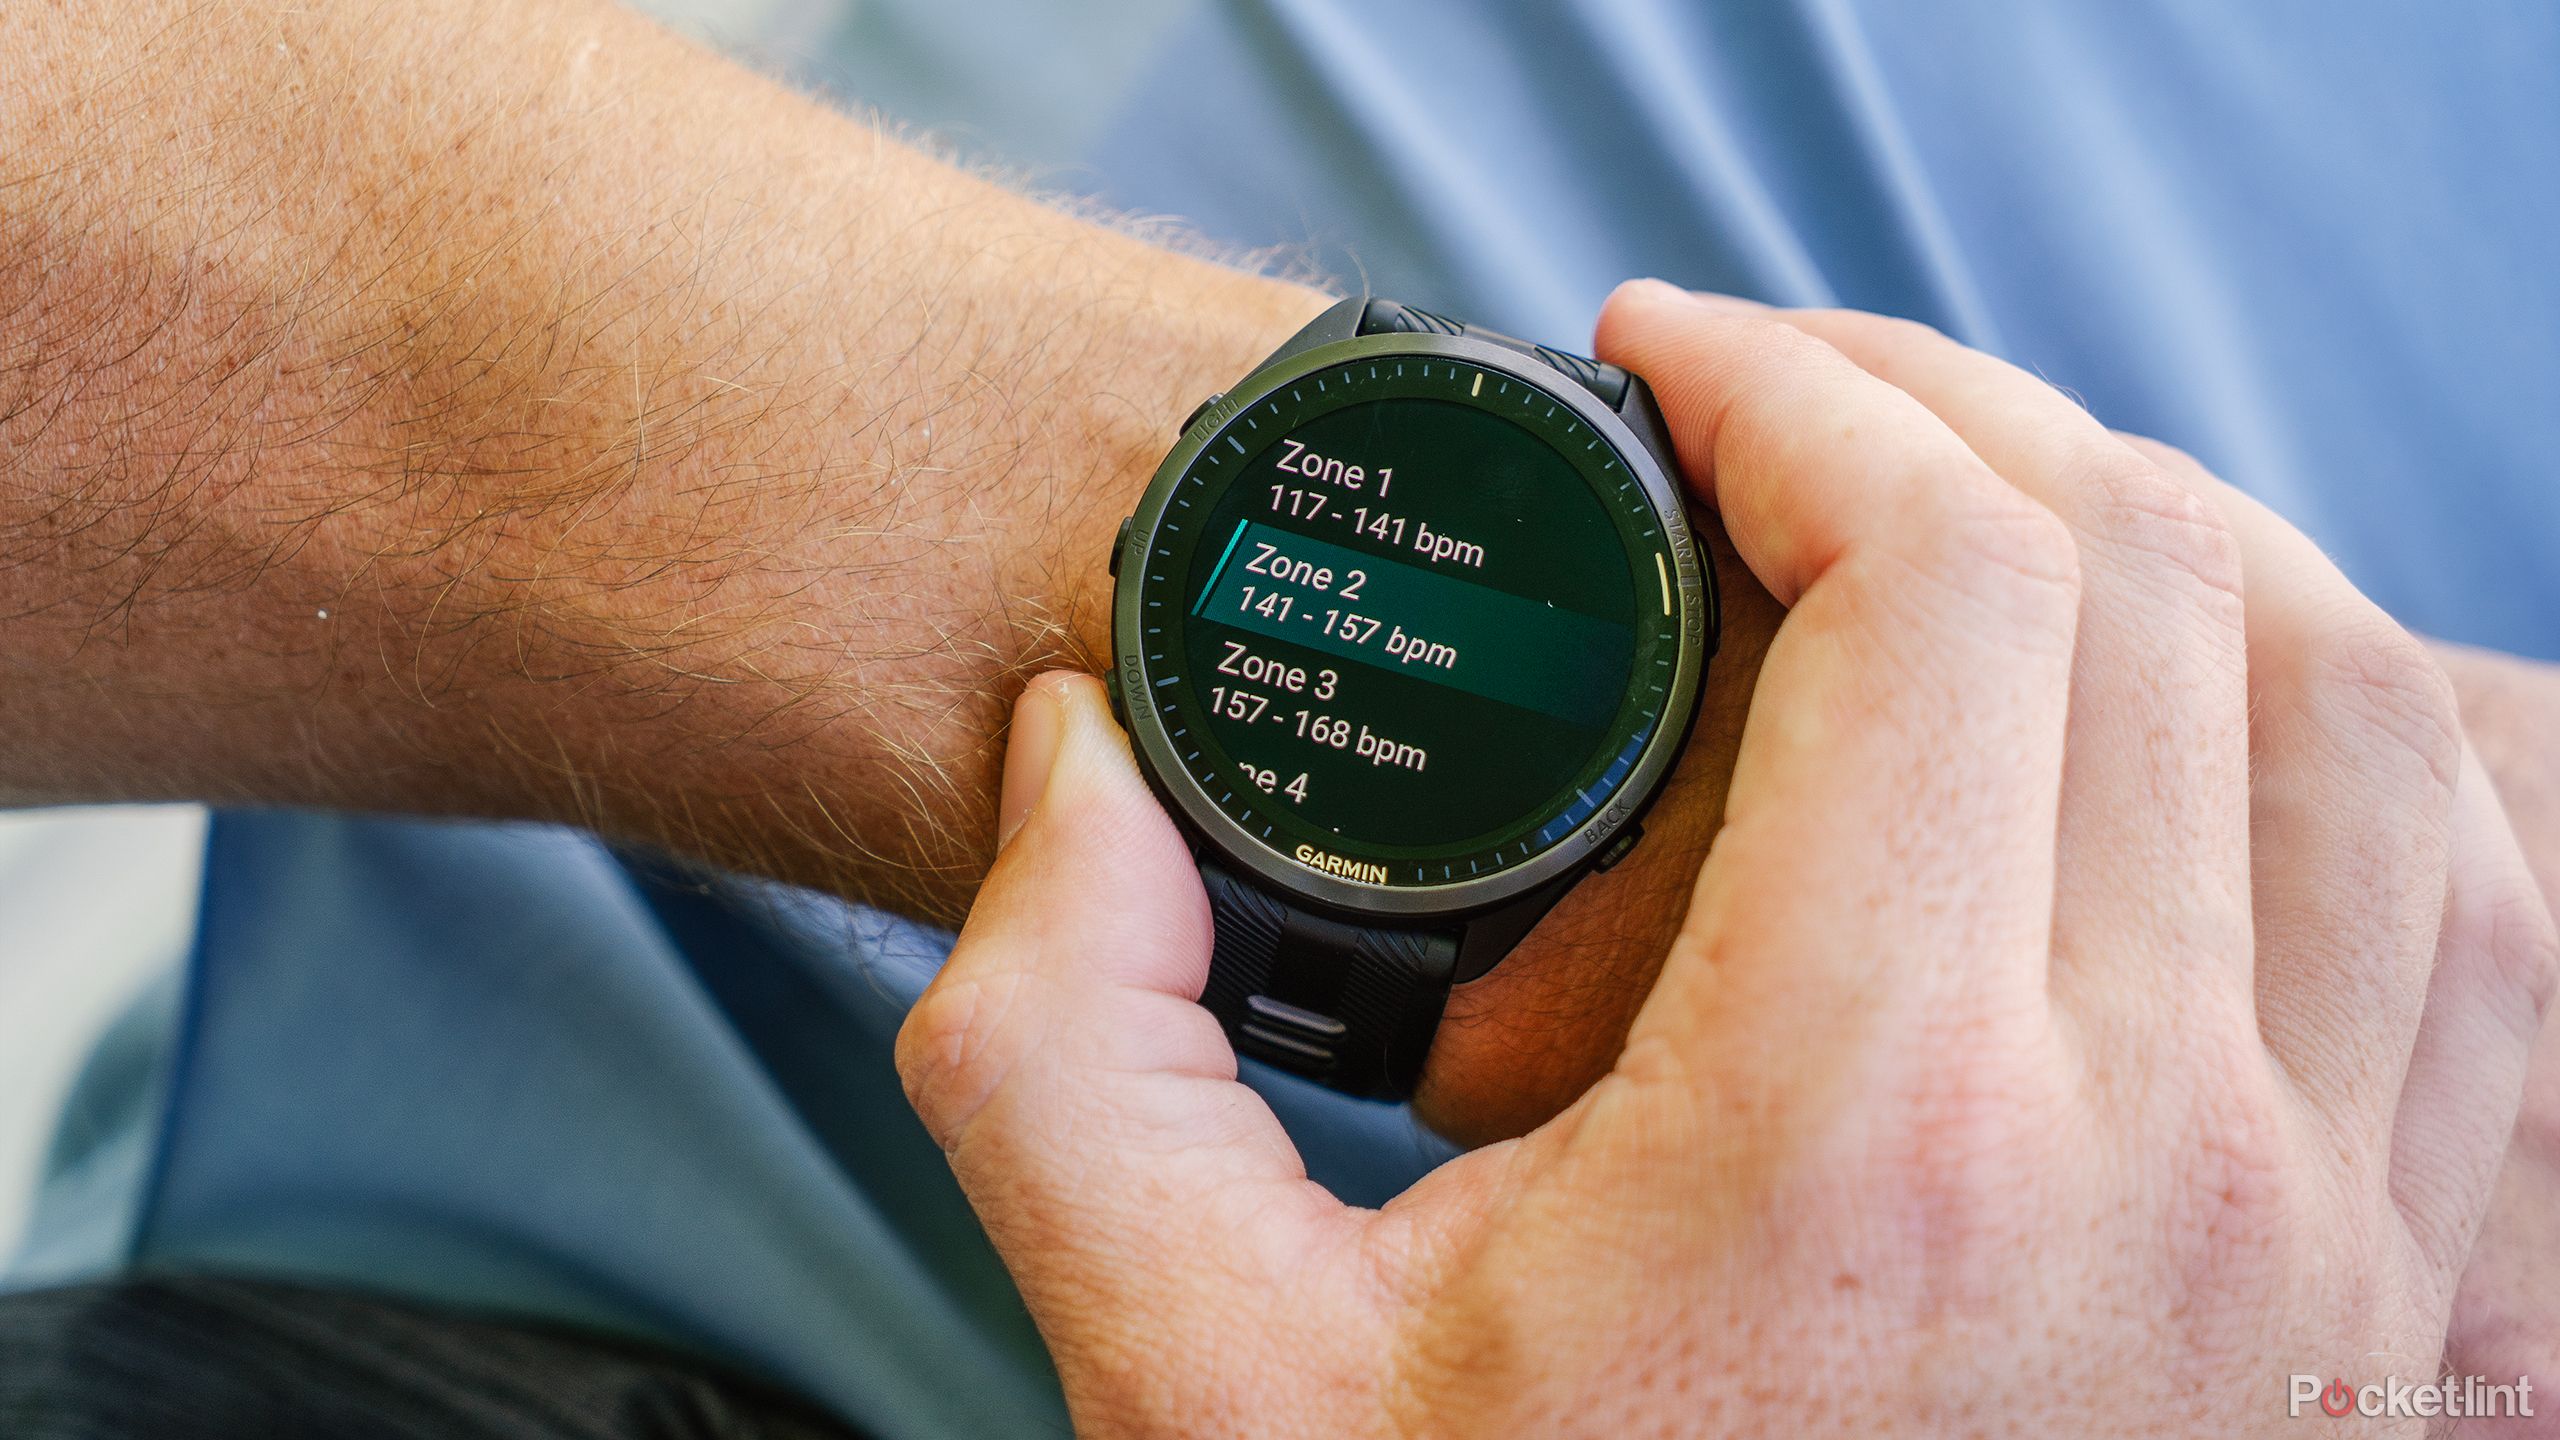 How to turn on heart rate alerts on a Garmin watch